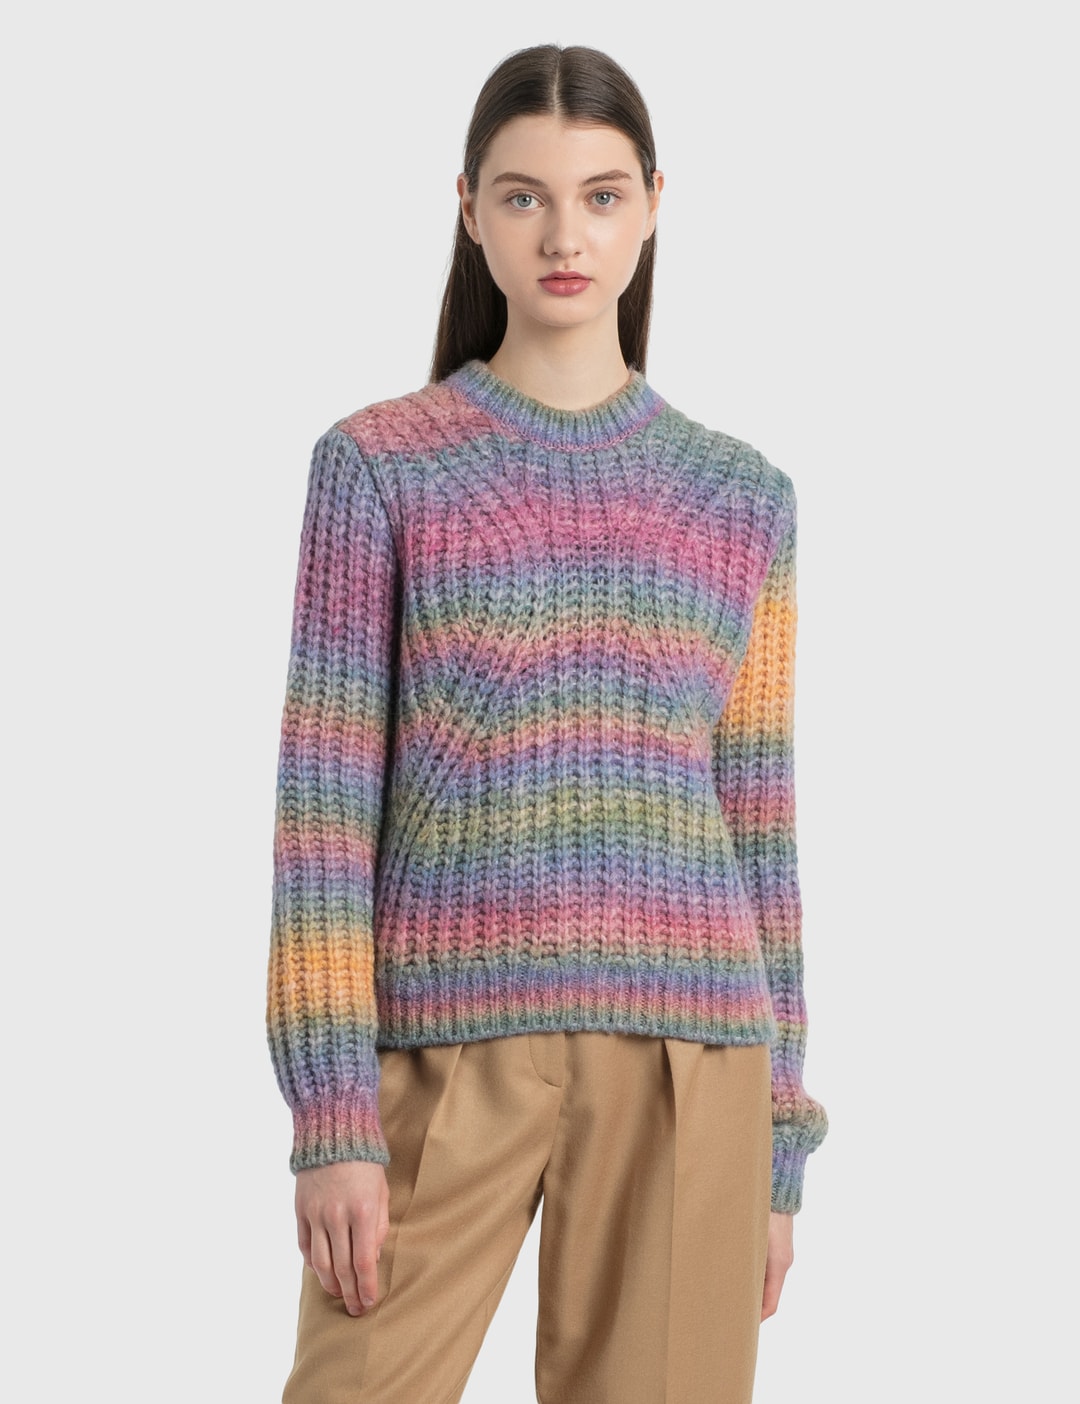 A.P.C. - Marianne Sweater | HBX - Globally Curated Fashion and ...